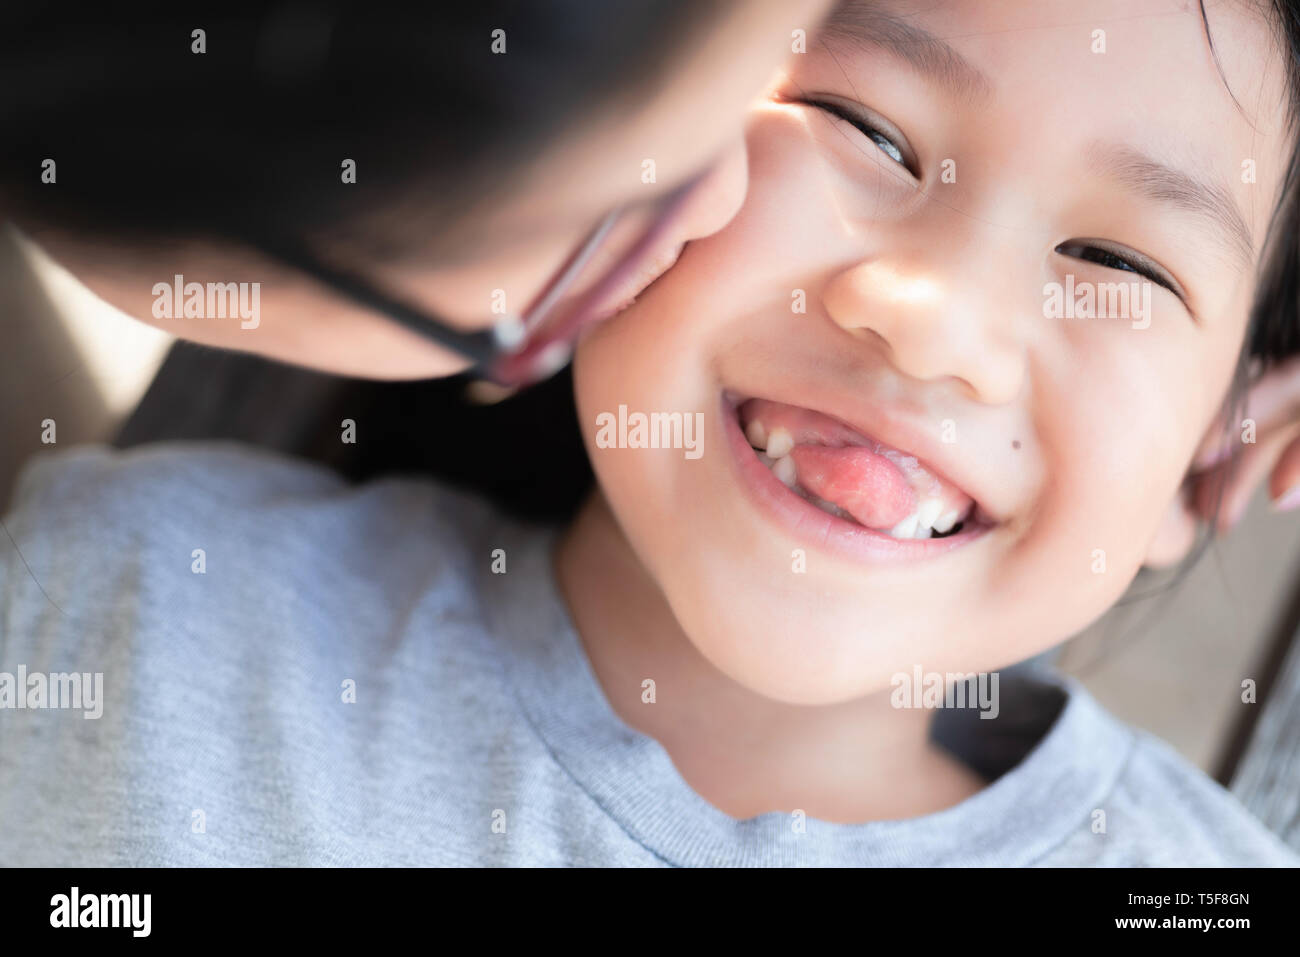 Mother kiss the funny loose teeth girl Stock Photo